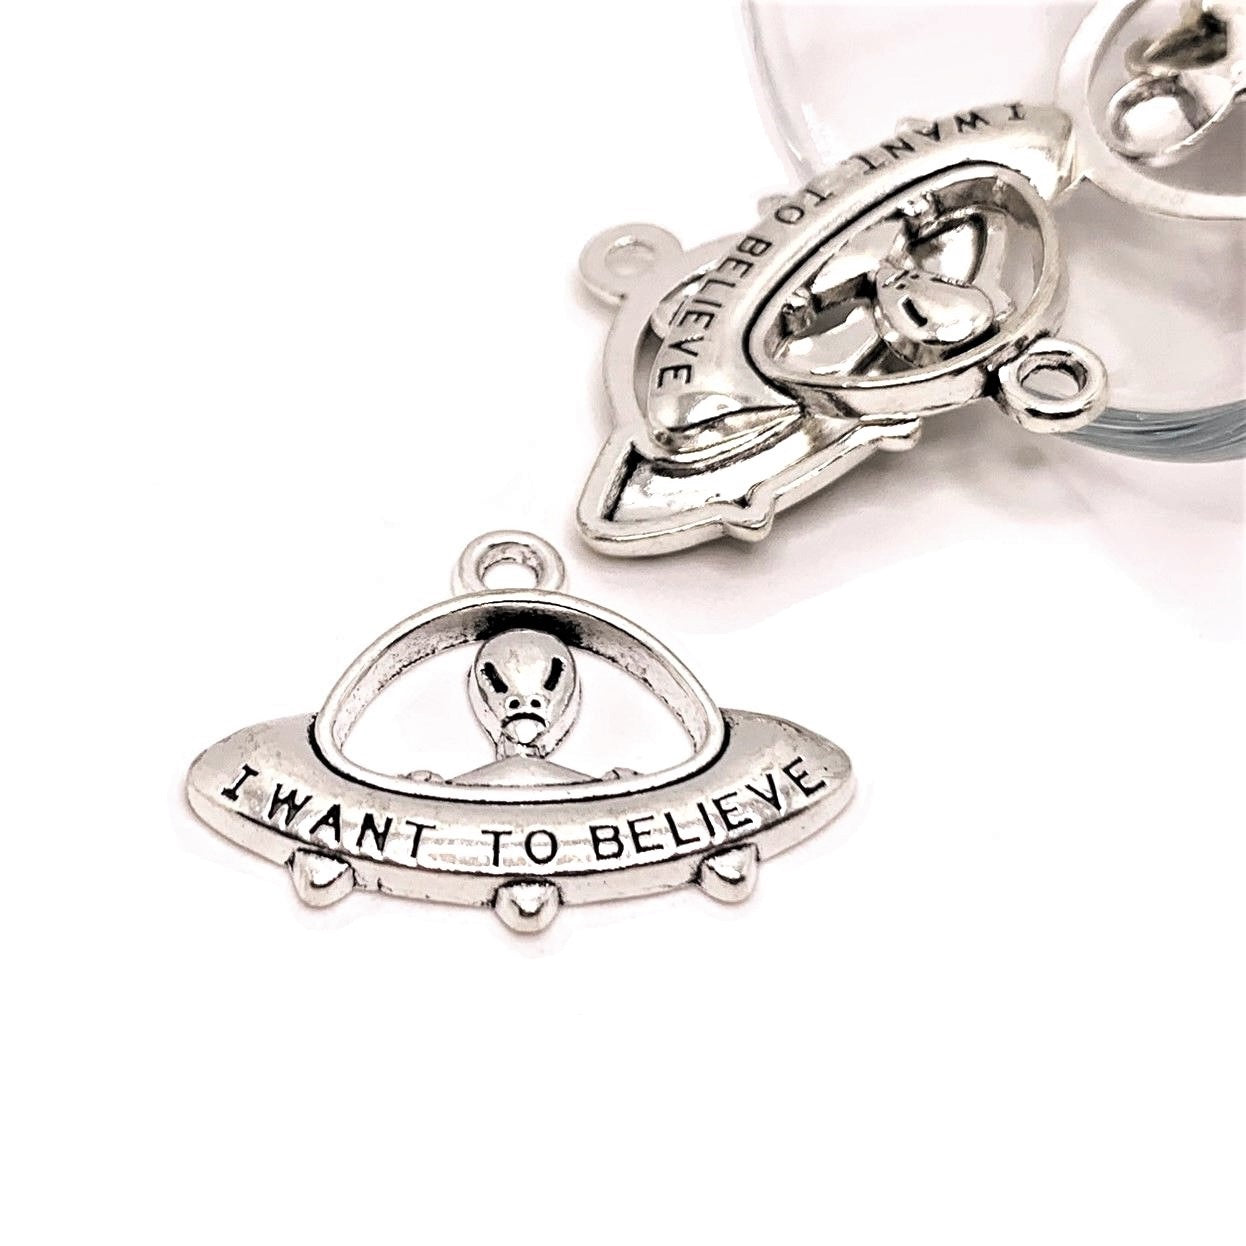 4, 20 or 50 Pieces: Silver I Want to Believe Alien Ship Charms